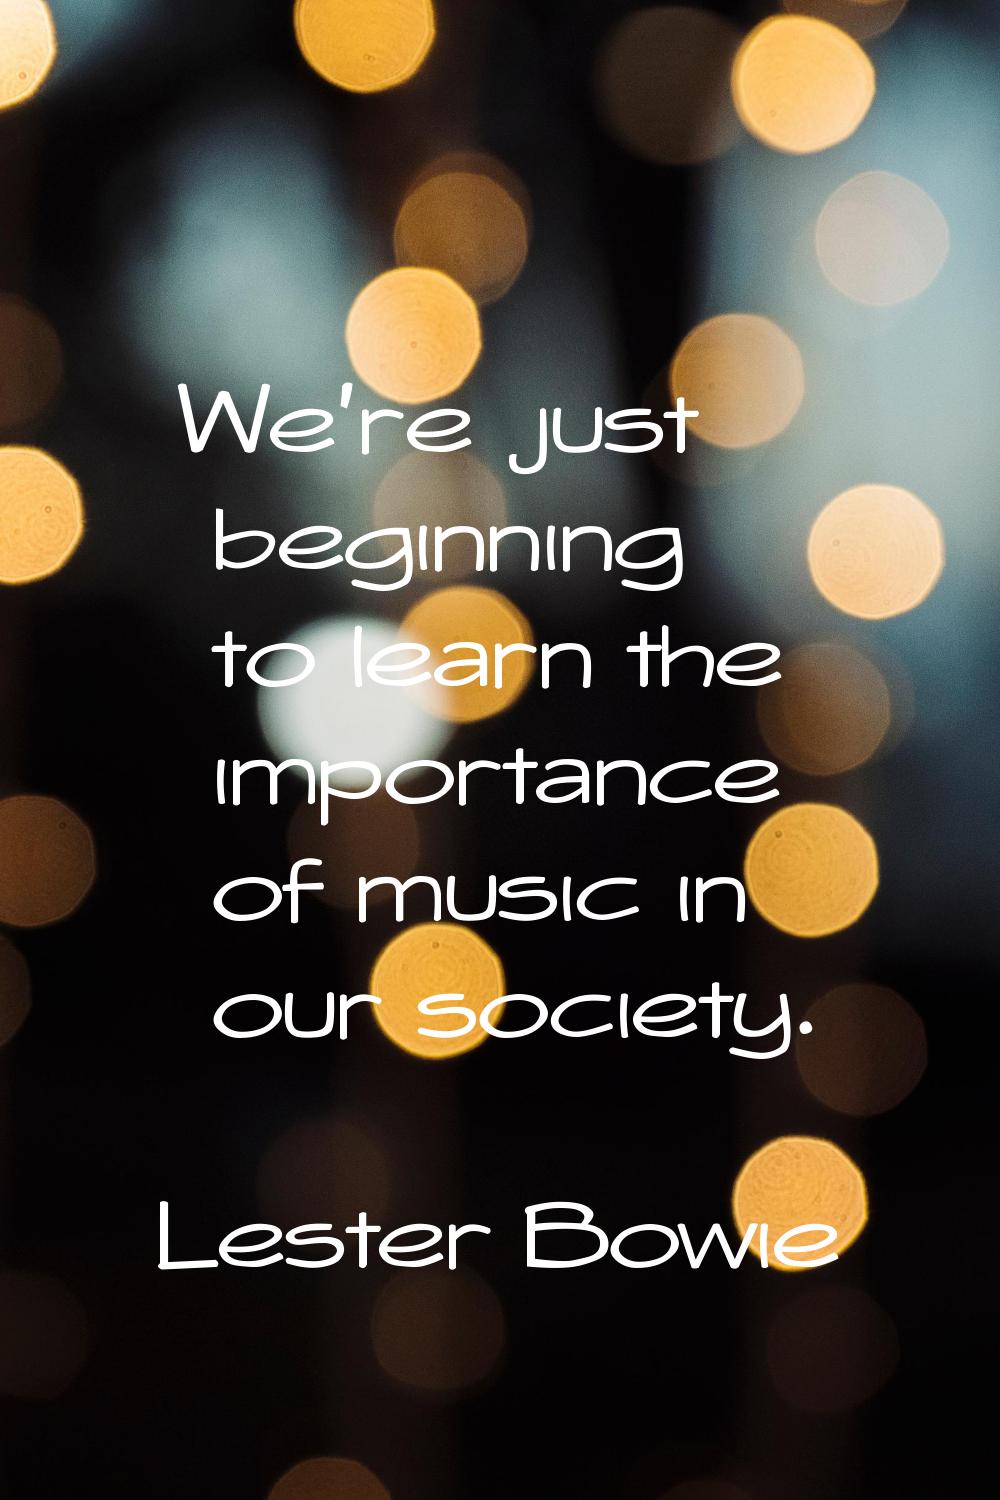 We're just beginning to learn the importance of music in our society.